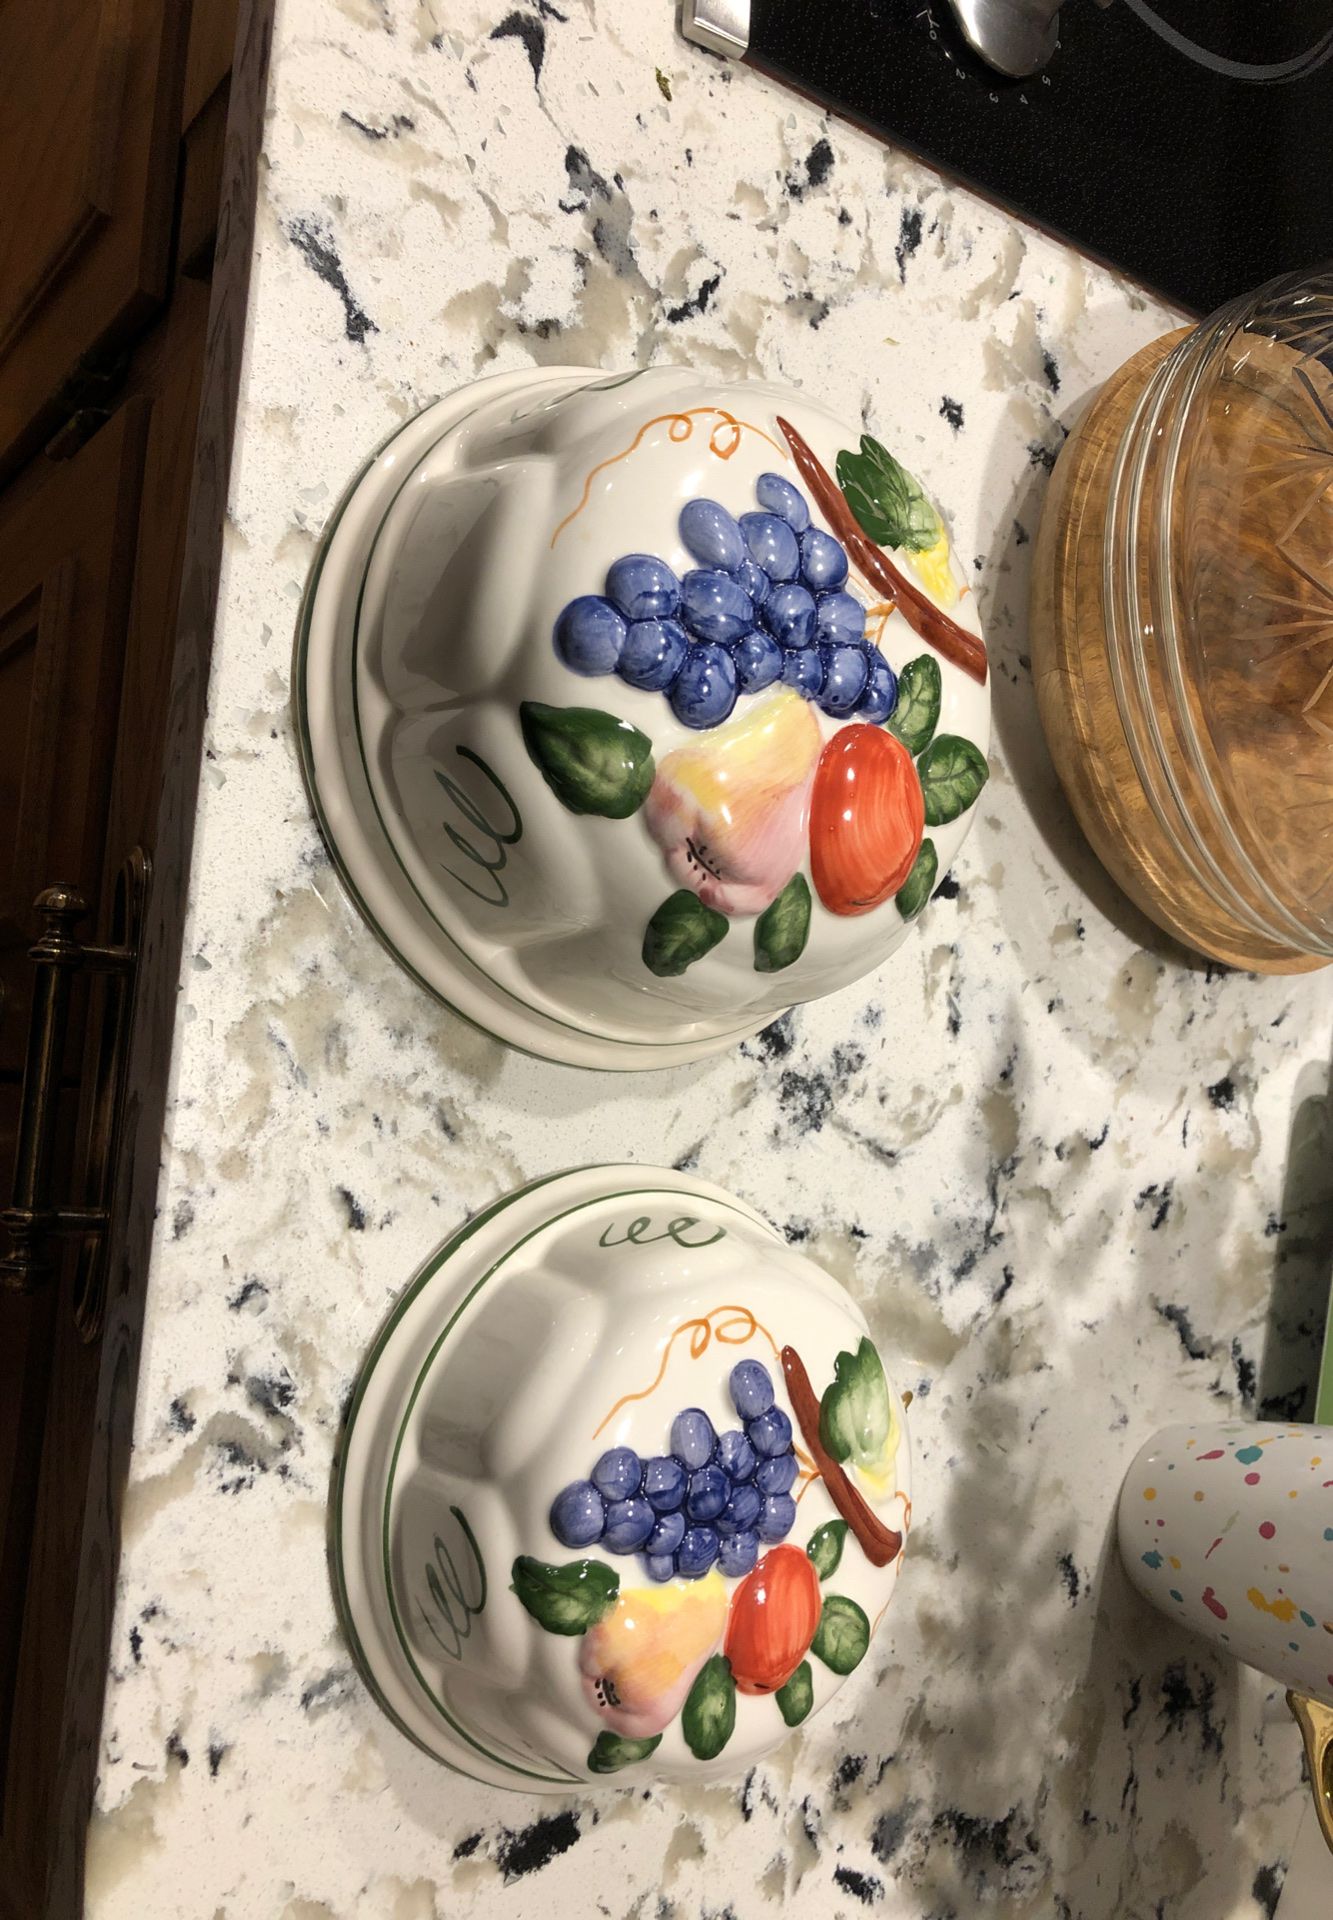 2 ceramic decorative molds . Can be hung as a decoration or used as a mold.